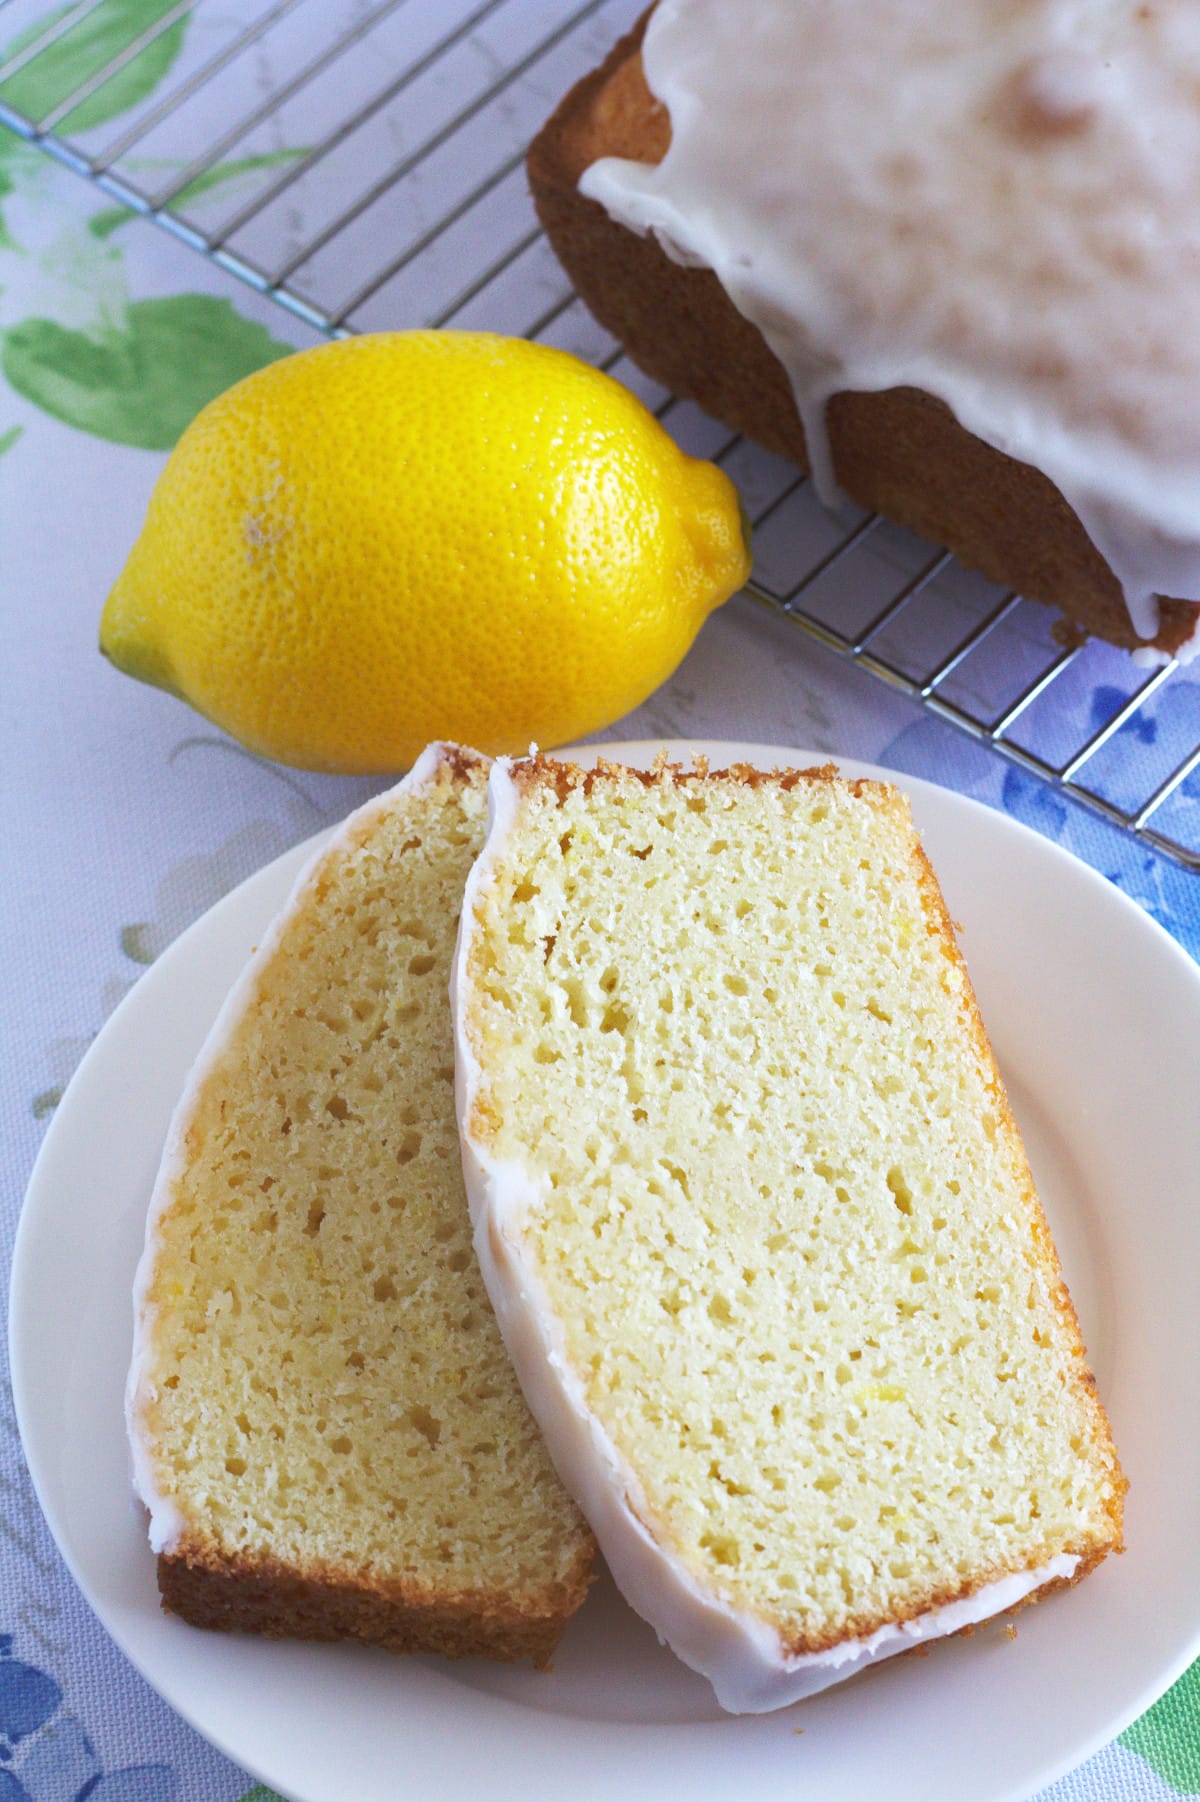 Two slices of lemon loaf on a plate with a lemon and the rest of the loaf.